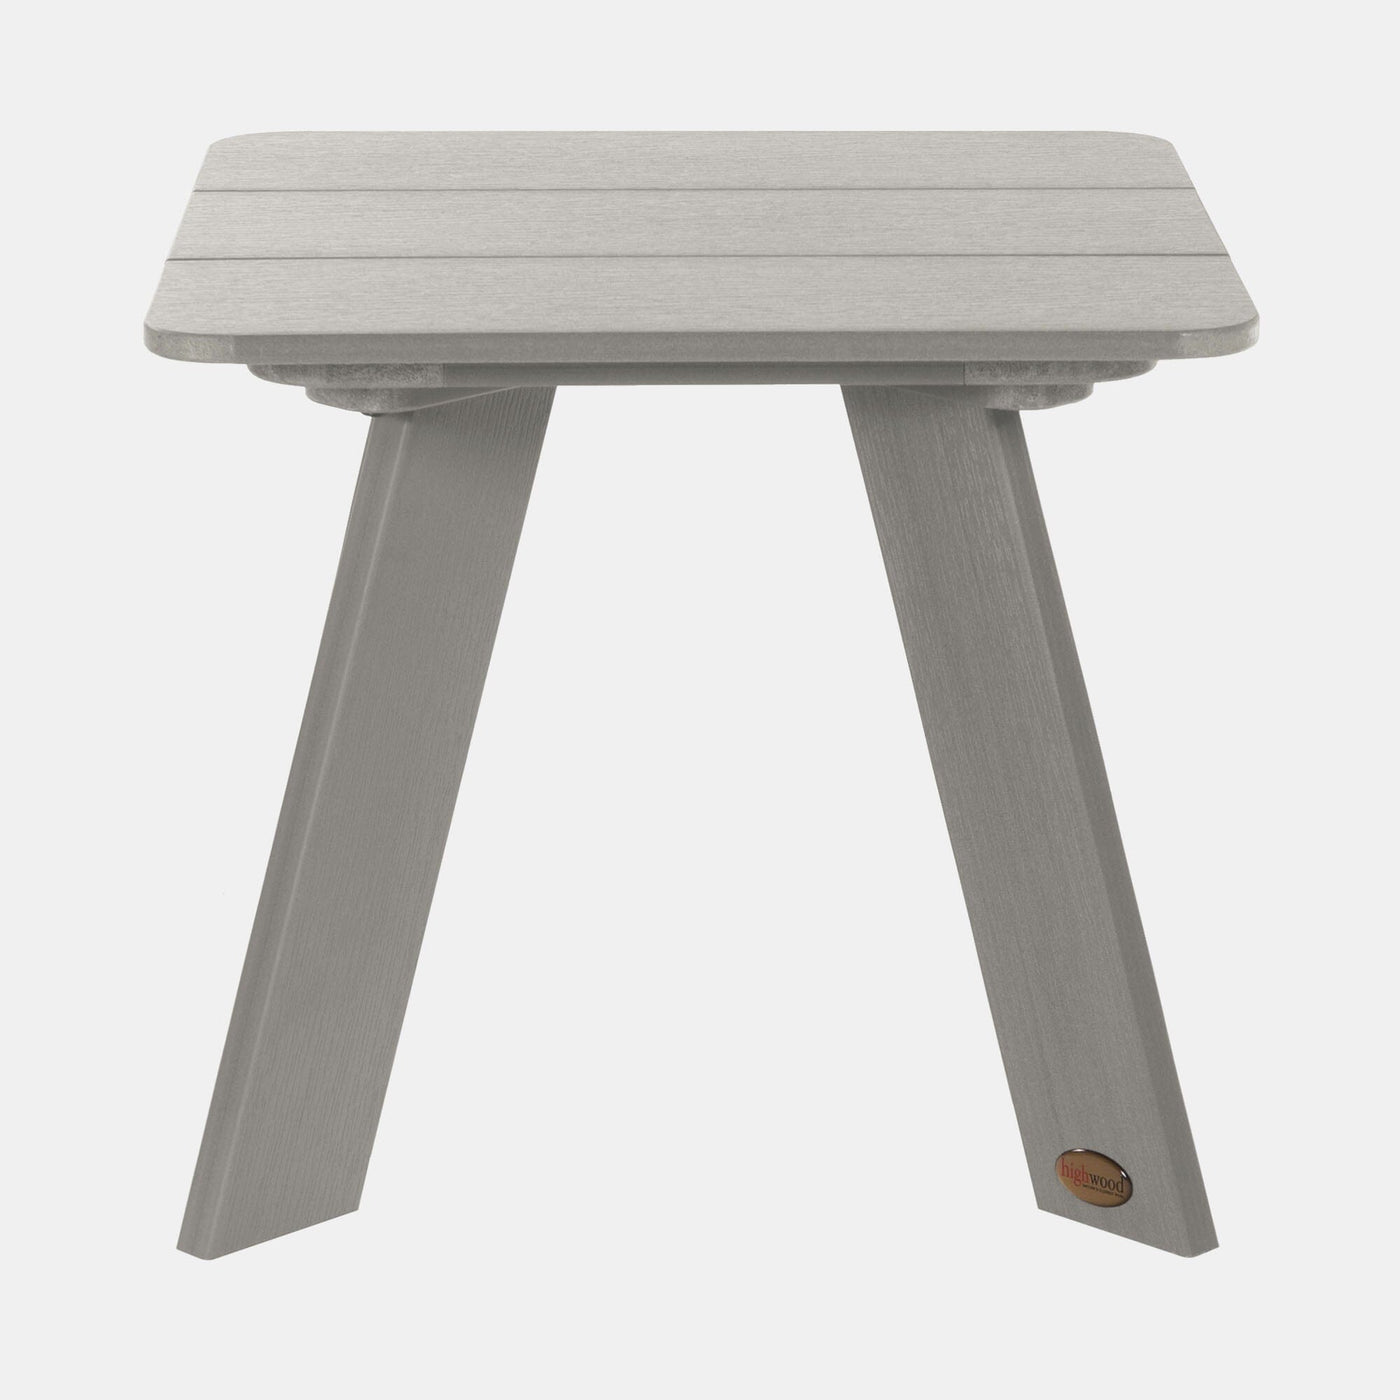 Front view of Italica Modern side table in Harbor Gray